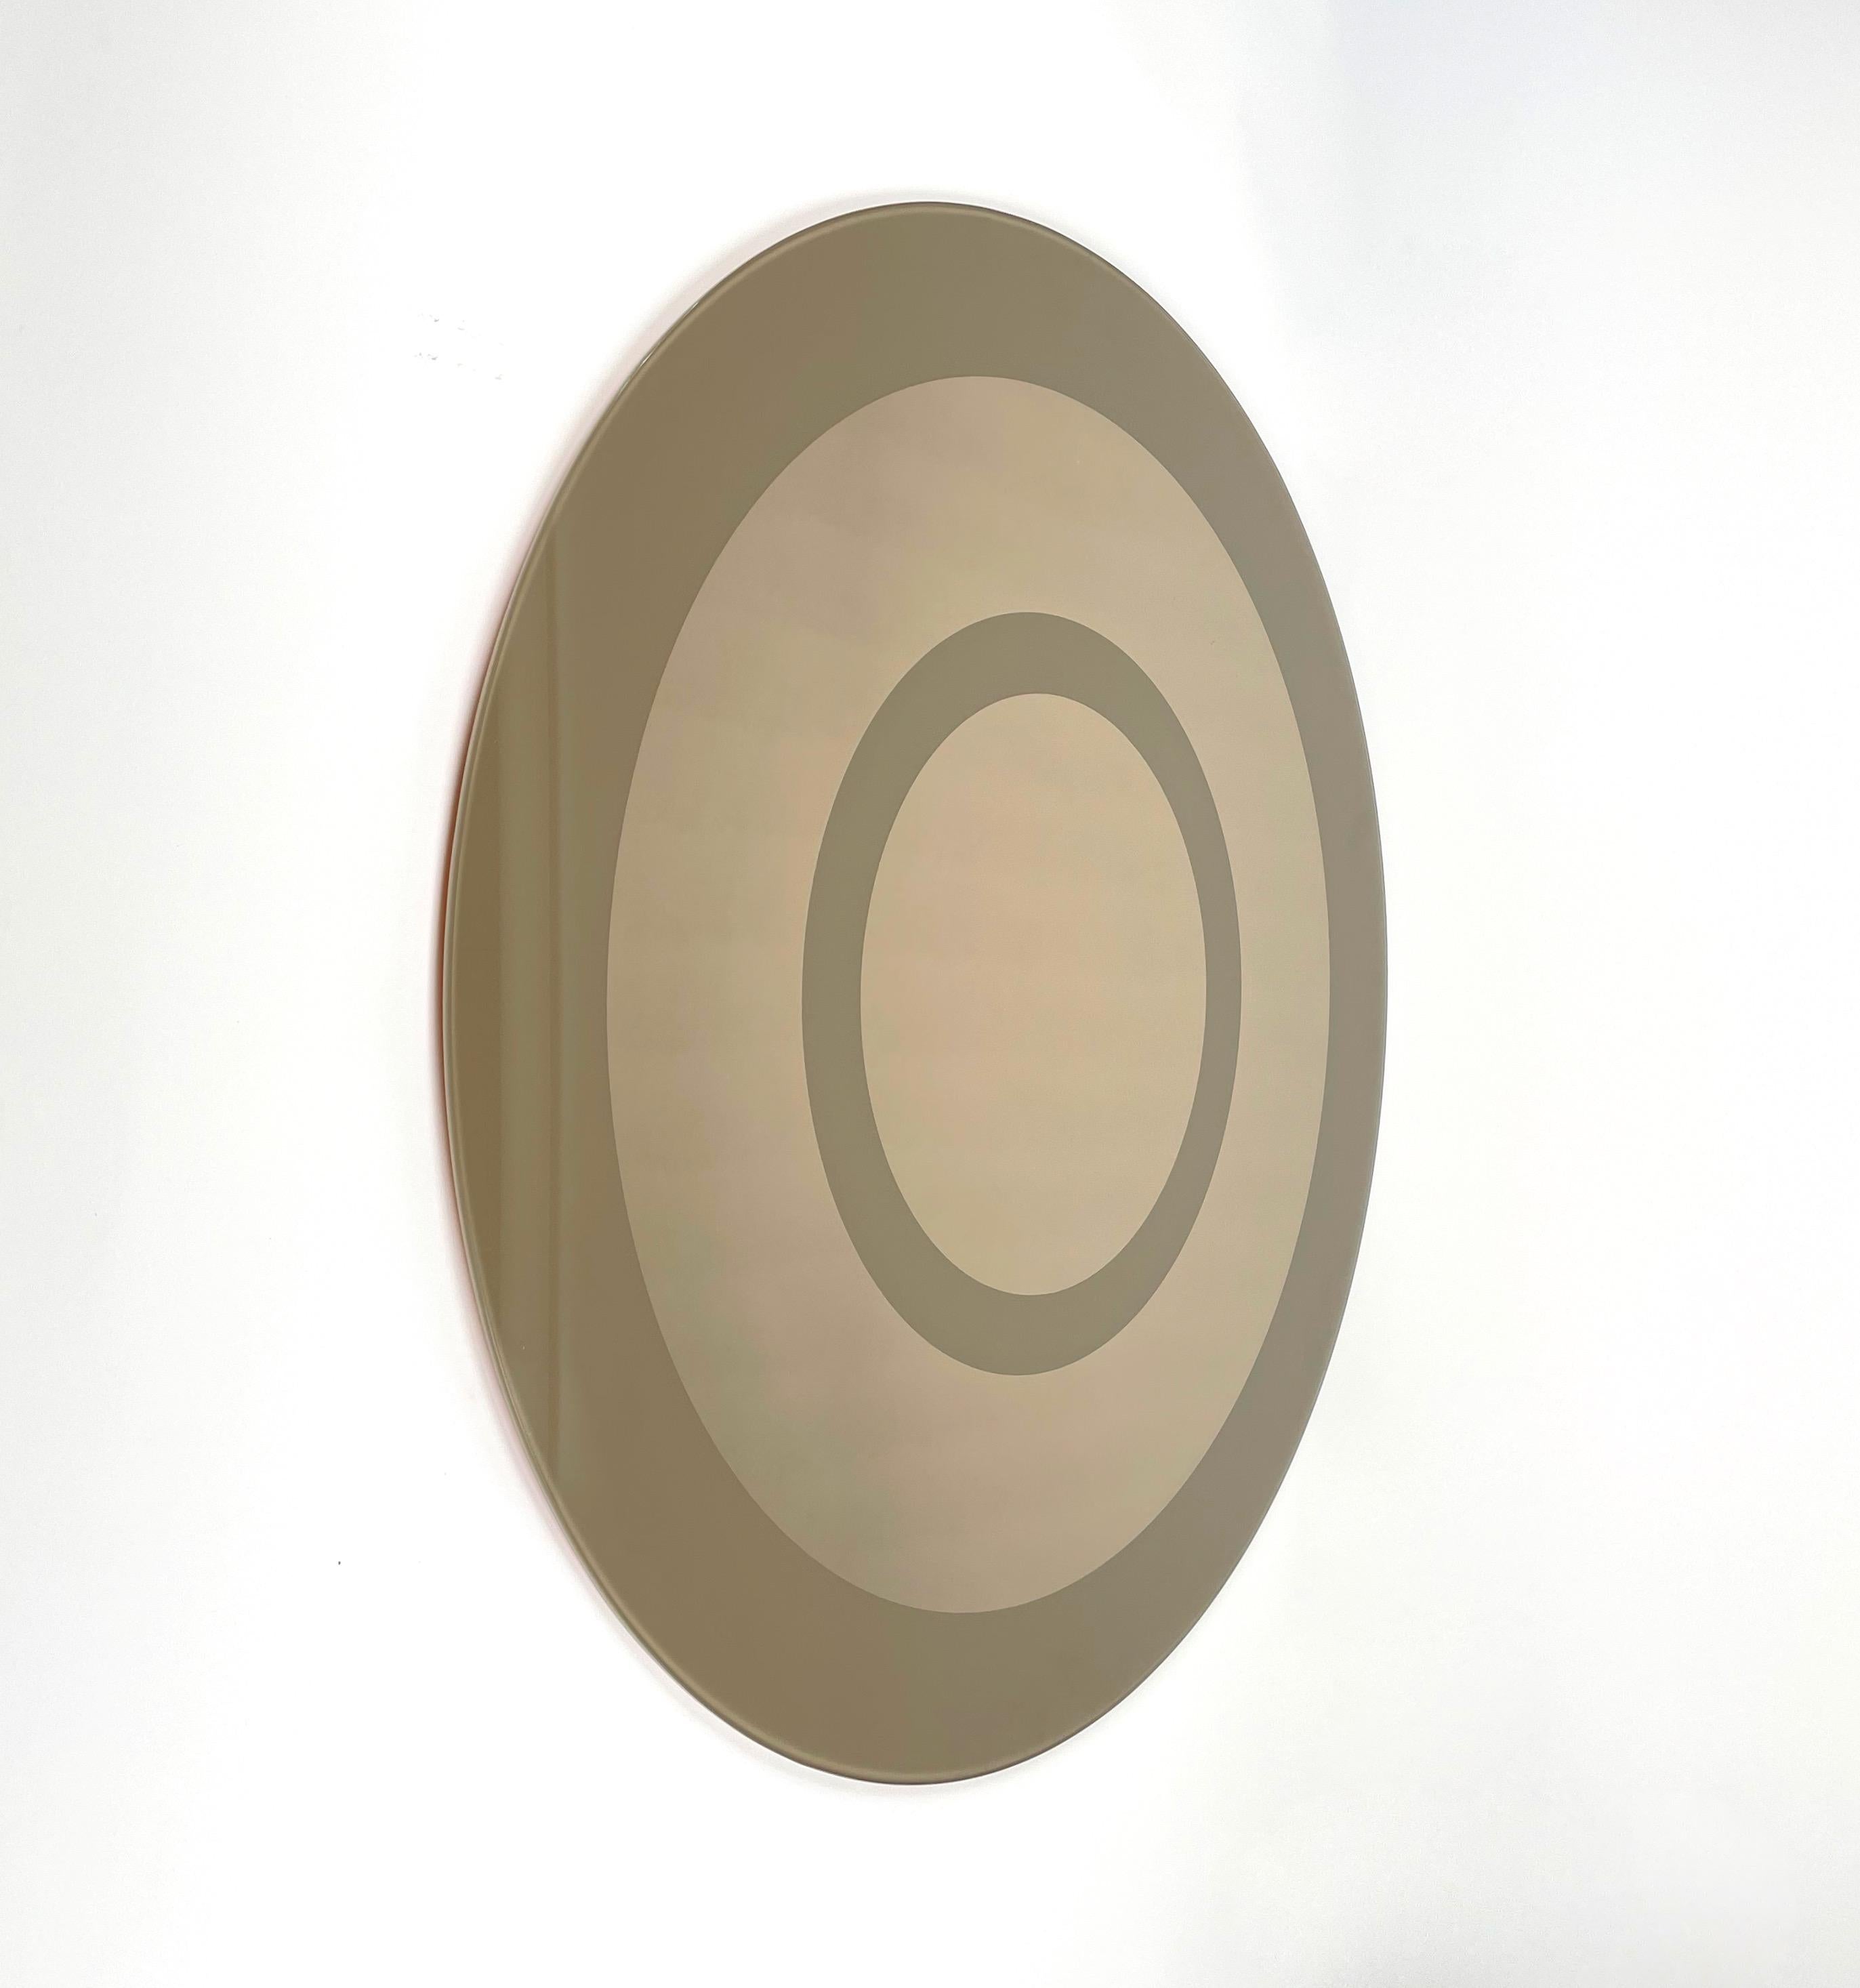 This beautiful large round wall mirror in double color was designed by Giuseppe Raimondi for Cristal-Art.

Made in Italy in the 1970s.